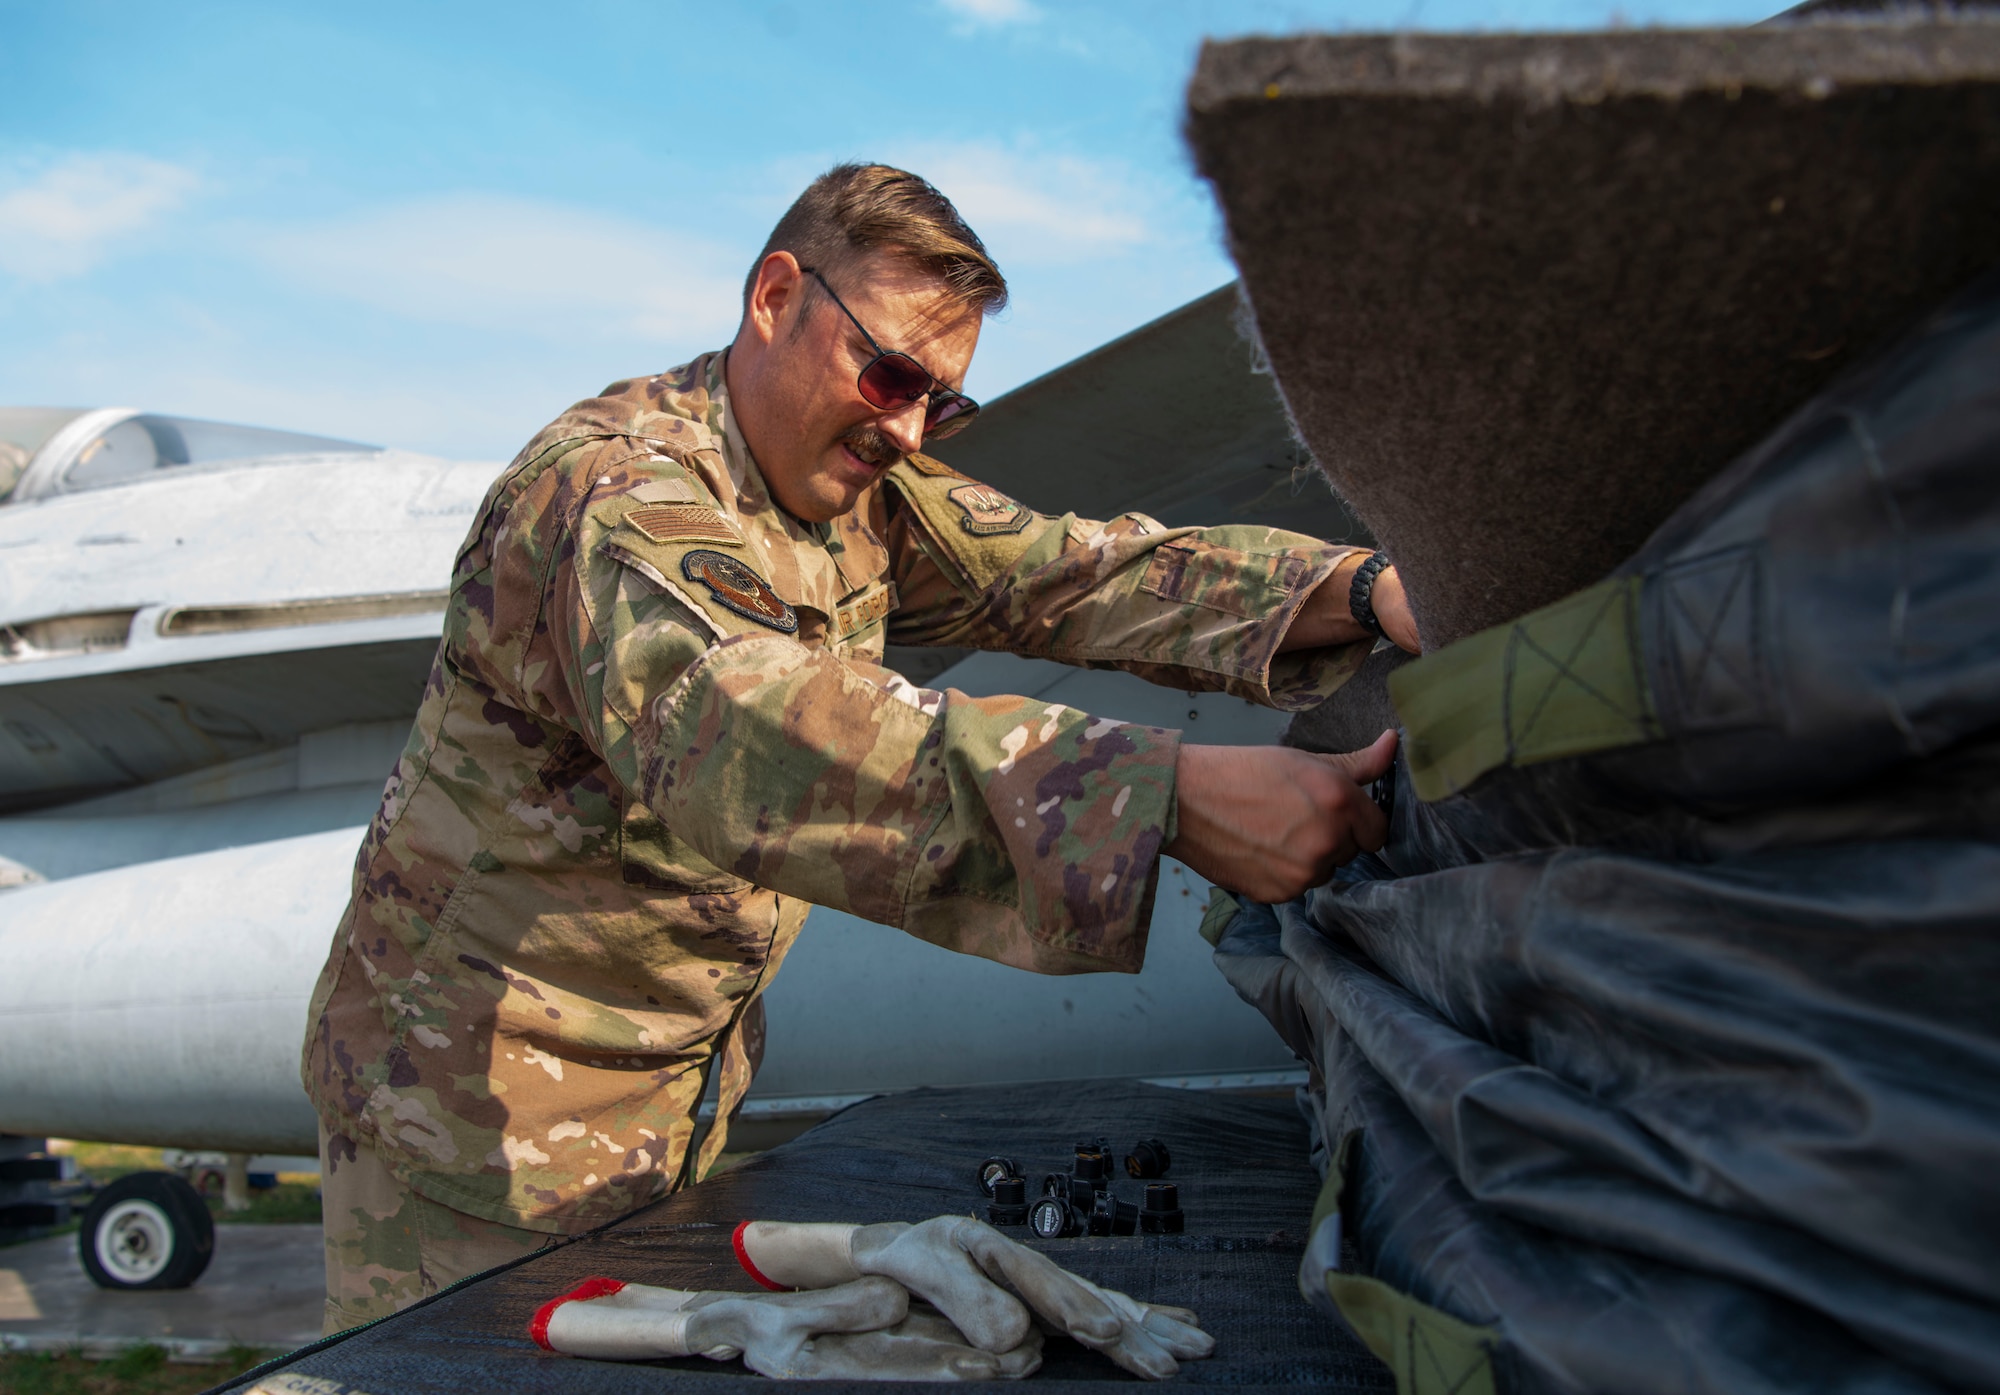 Tech. Sgt. Thomas Niewulis, 56th Rescue Generation Squadron support section NCOIC, pack up a lift bag during a crashed, damaged or disabled aircraft (CDDAR) recovery training at Aviano Air Base, Italy, Oct. 20, 2022. These trainings give Airmen practice needed to execute real-world recoveries effectively. (U.S. Air Force photo by Airman 1st Class Thomas Calopedis)